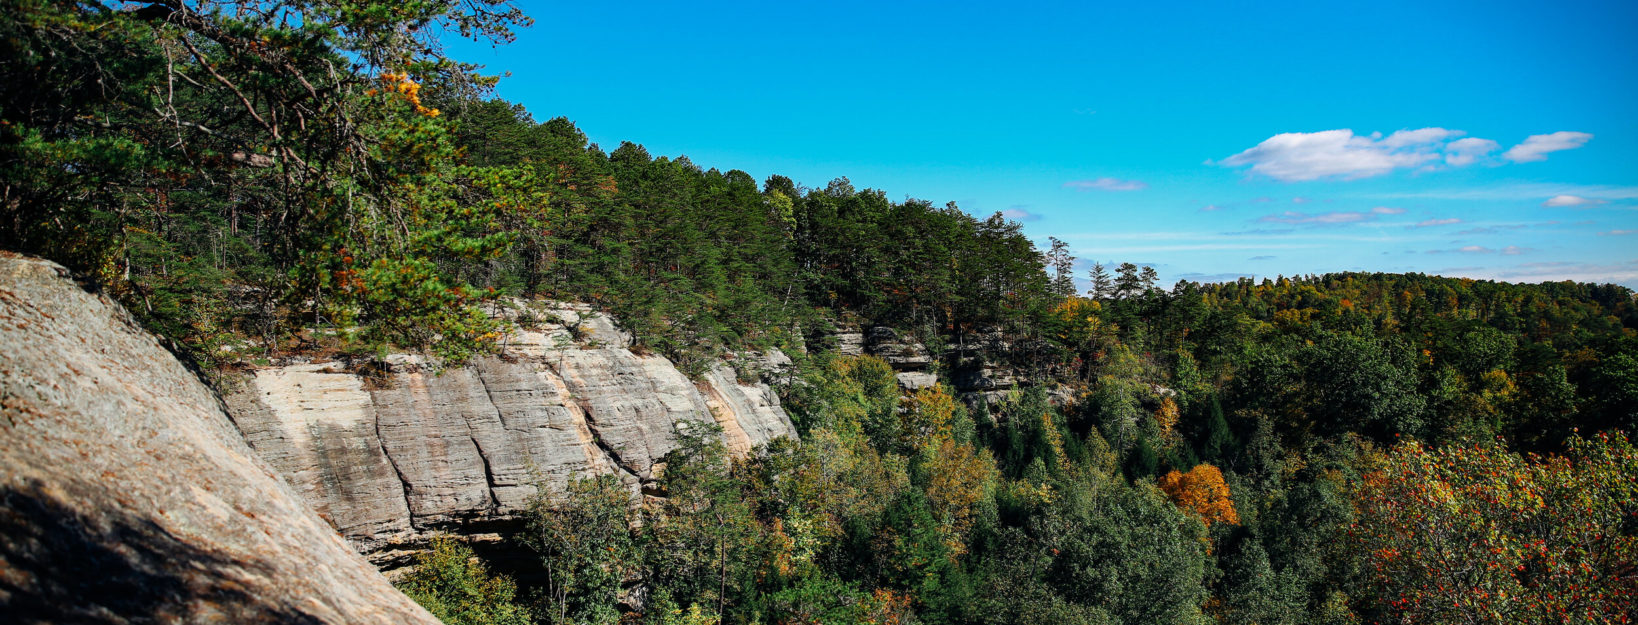 Sandstone cliffs, sky and trees at the Red River Gorge